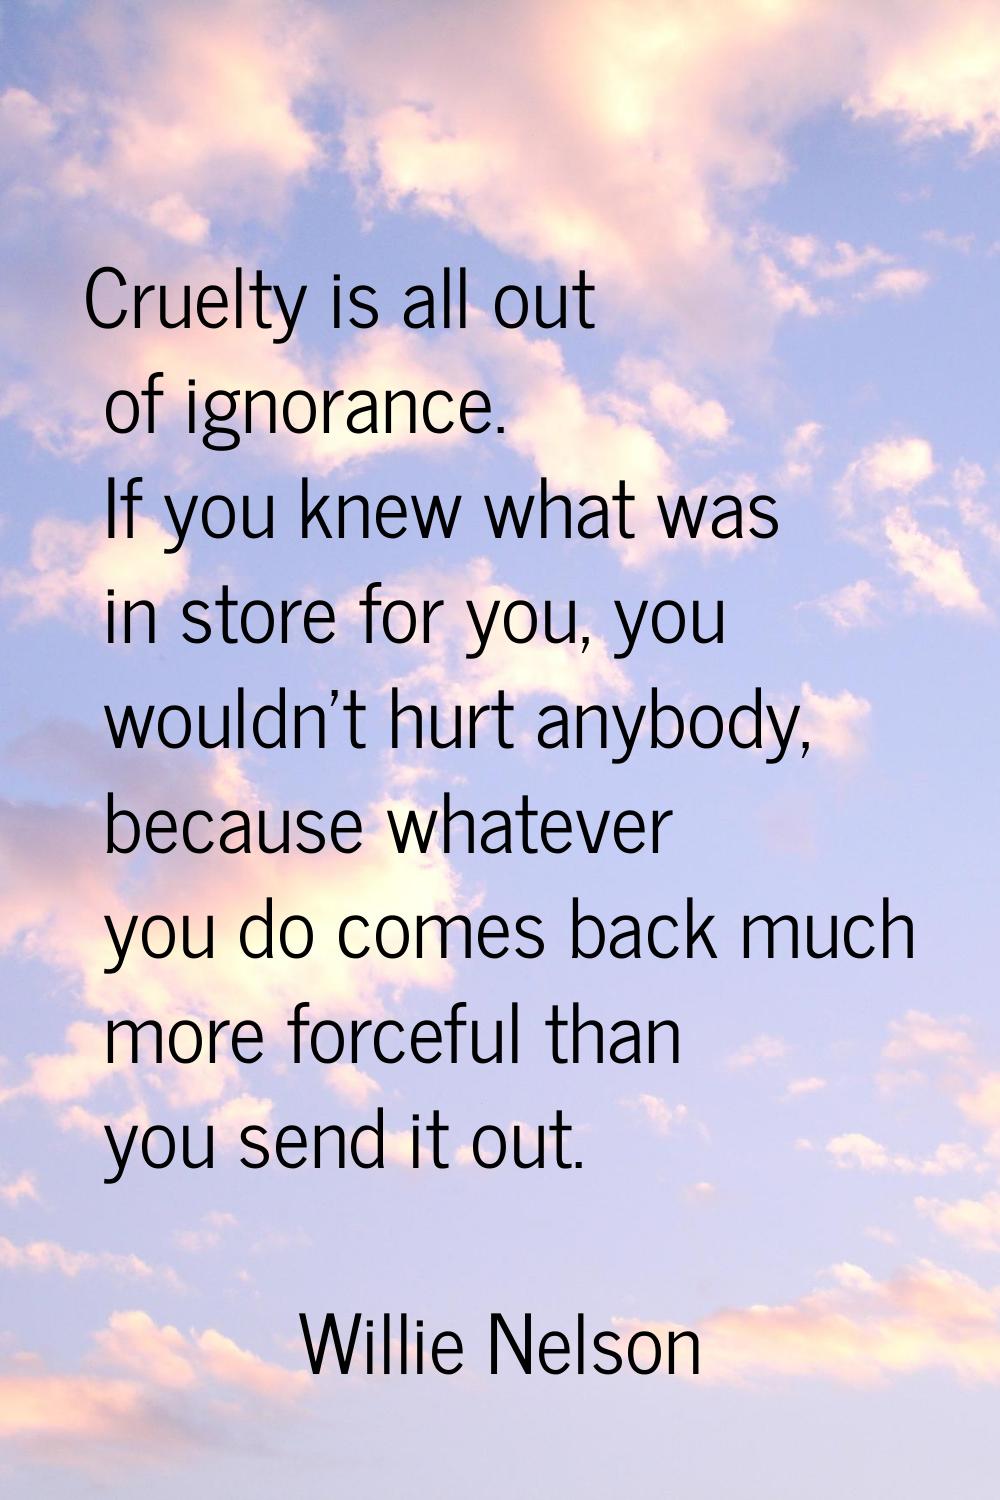 Cruelty is all out of ignorance. If you knew what was in store for you, you wouldn't hurt anybody, 